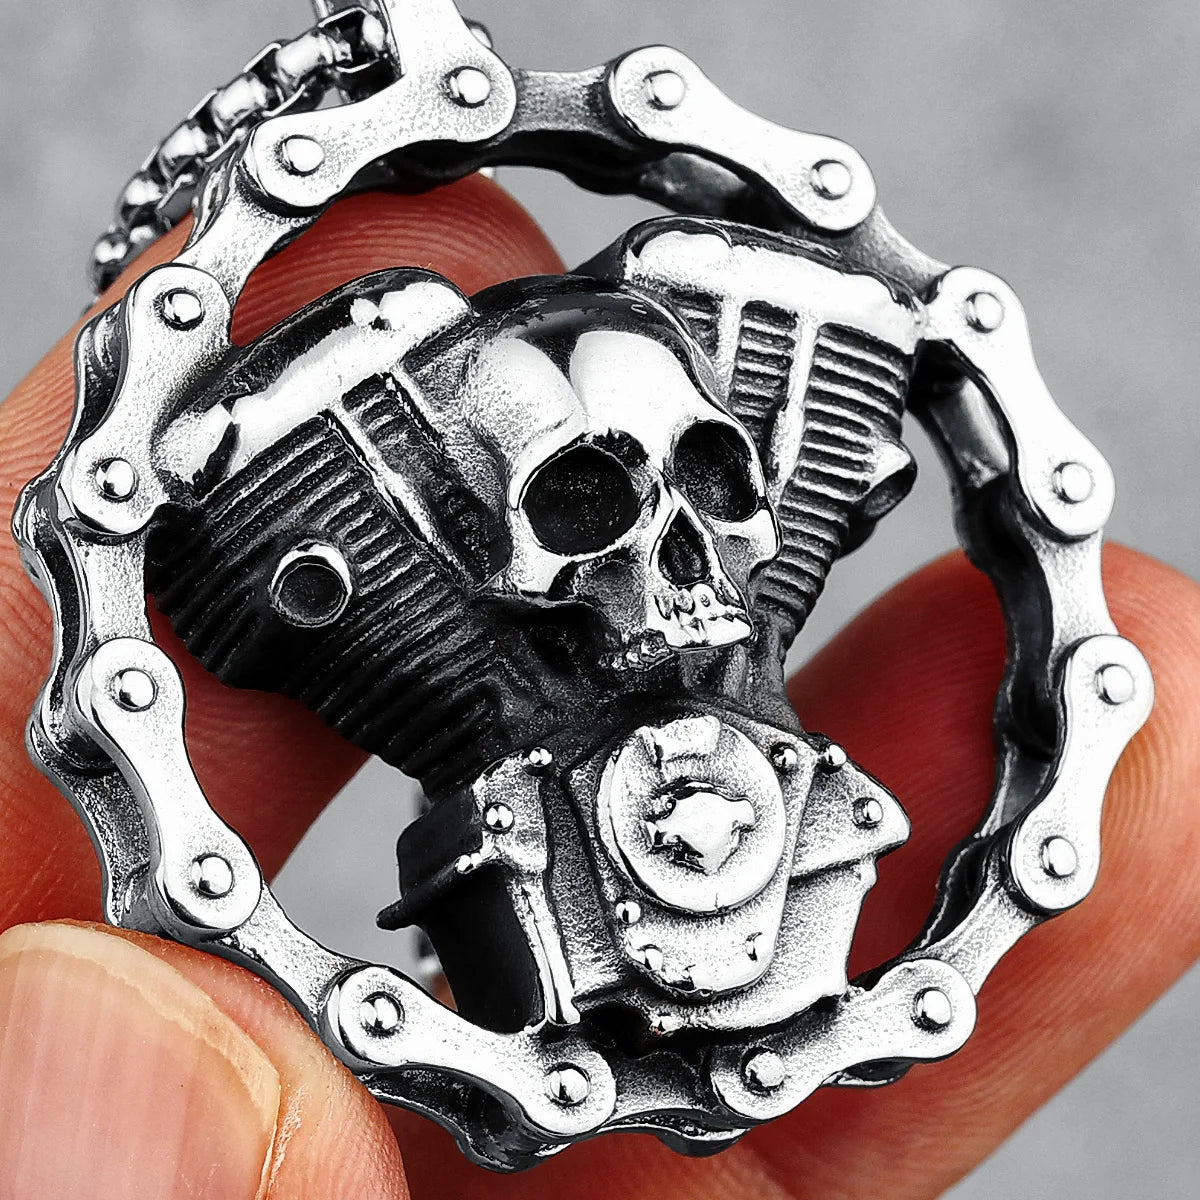 Vleee Retro Skull Engine Necklace: Men's Rock Punk Pendant, crafted in 316L Stainless Steel with Chain Machine.